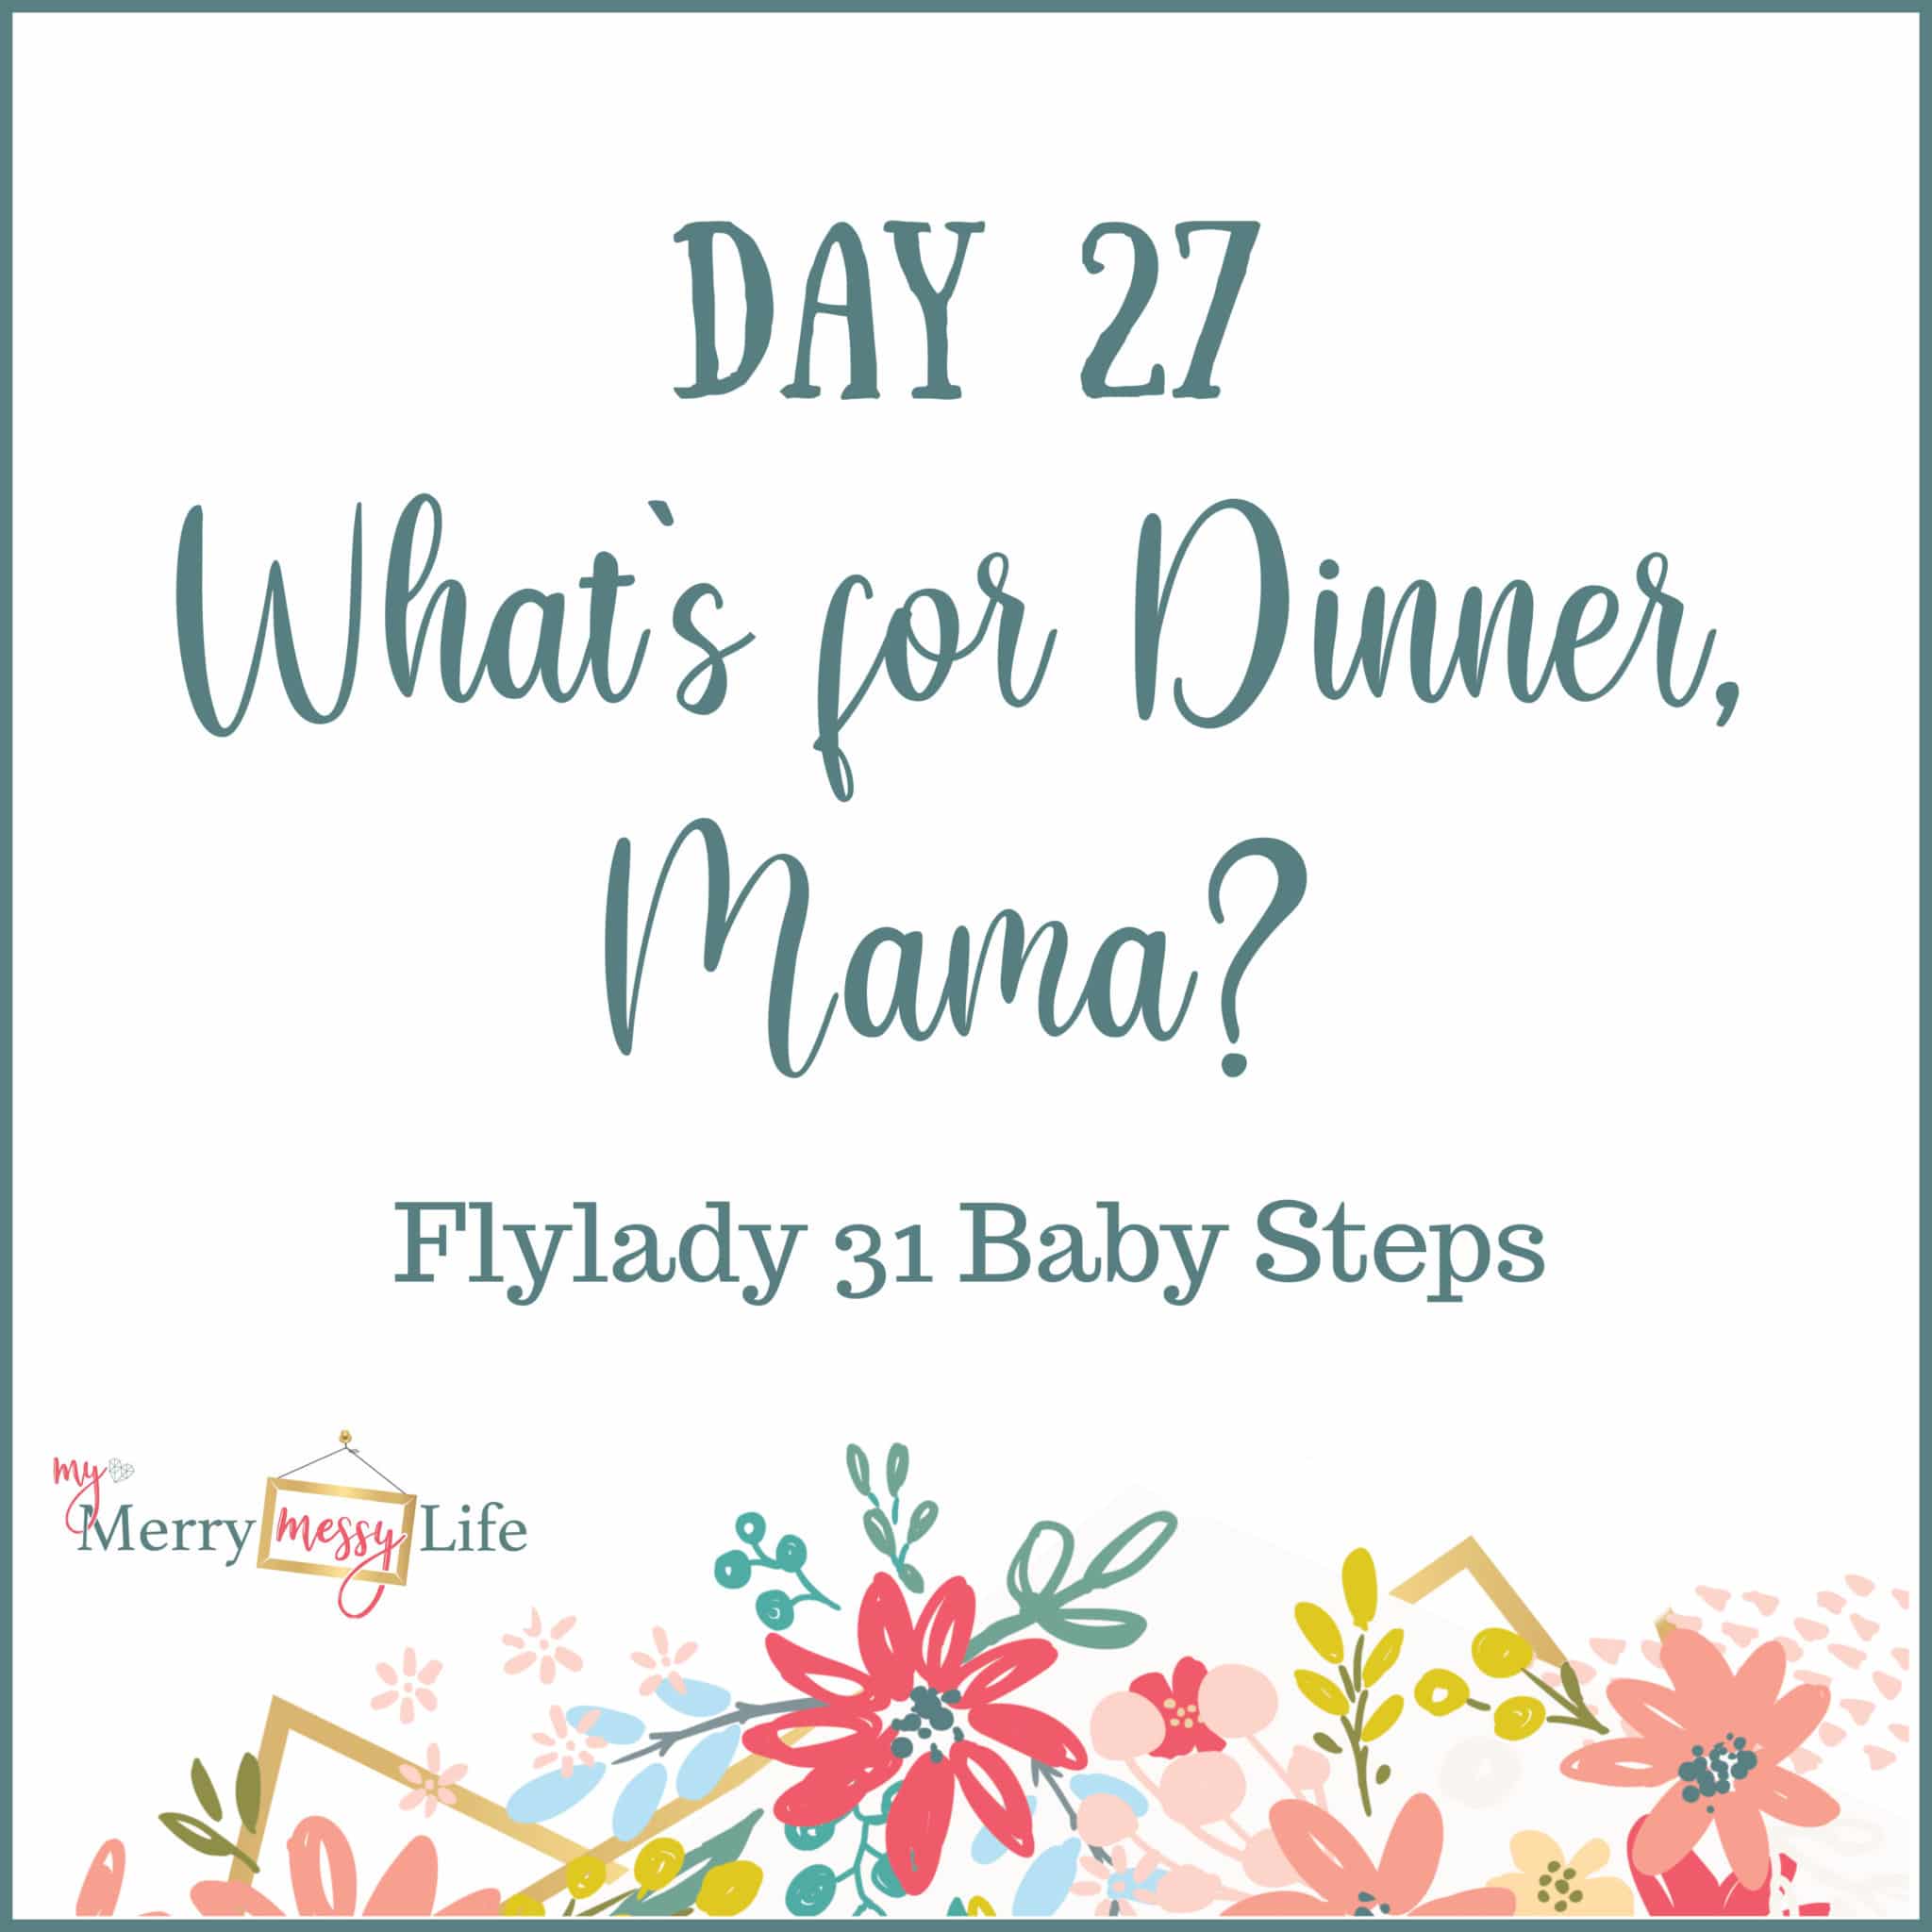 Flylady 31 Baby Steps - Day 27 - What's for Dinner?